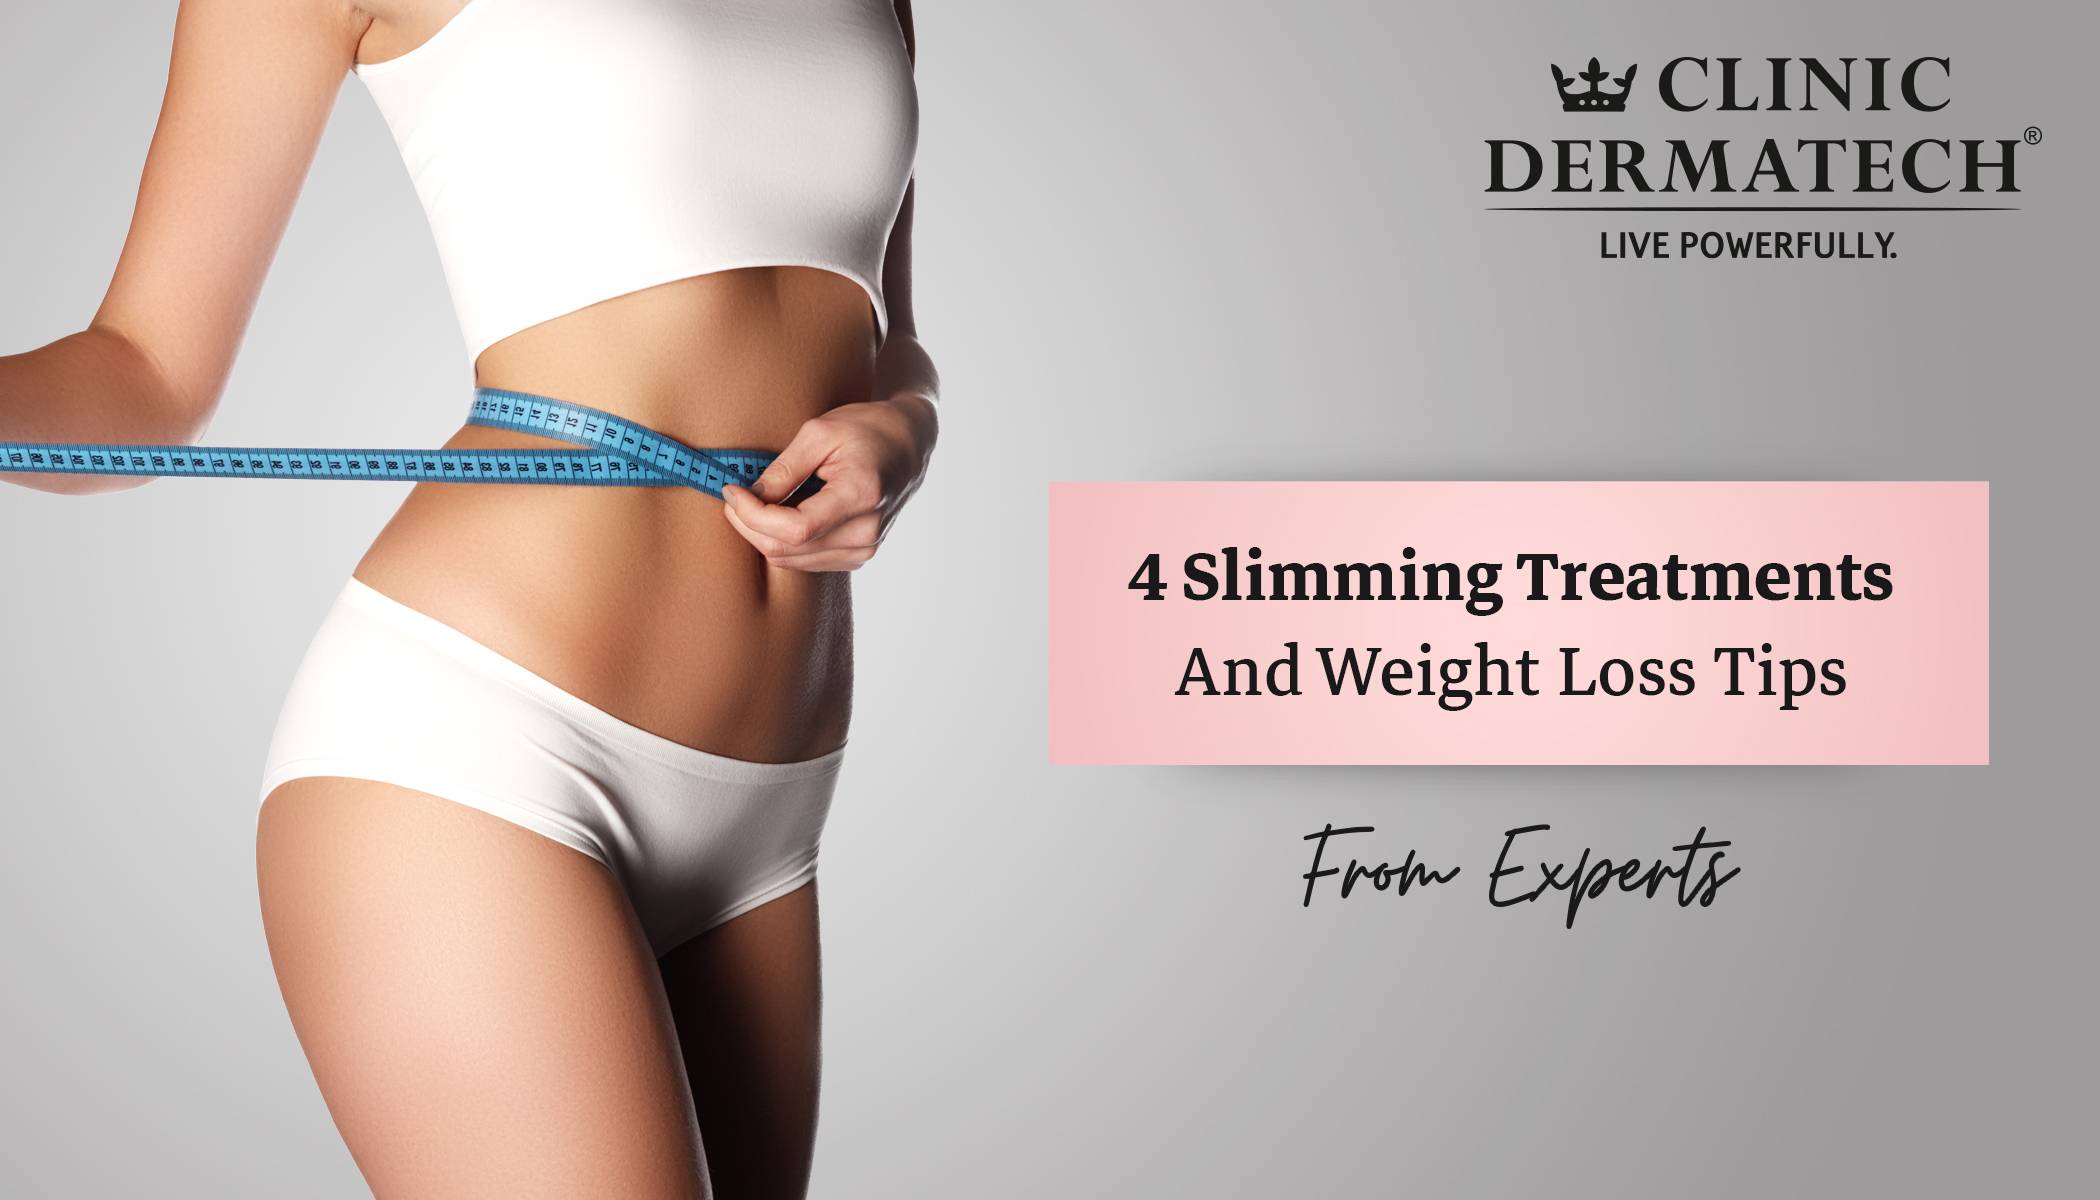 https://clinicdermatech.com/blog/wp-content/uploads/2022/04/4-Slimming-Treatments-And-Weight-Loss.jpg